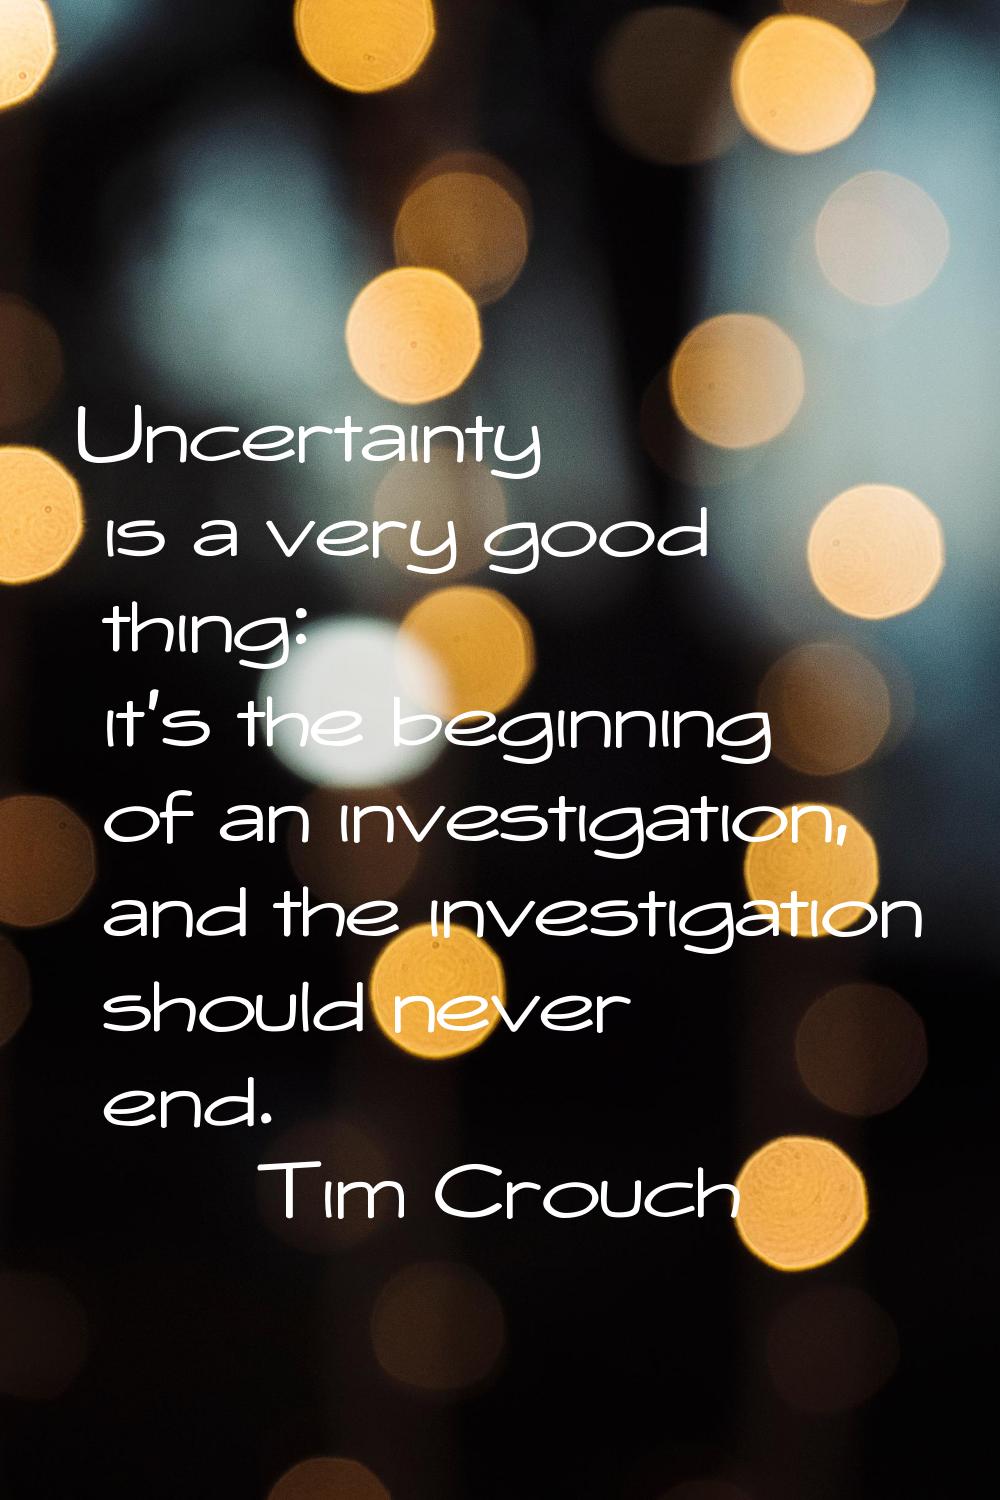 Uncertainty is a very good thing: it's the beginning of an investigation, and the investigation sho